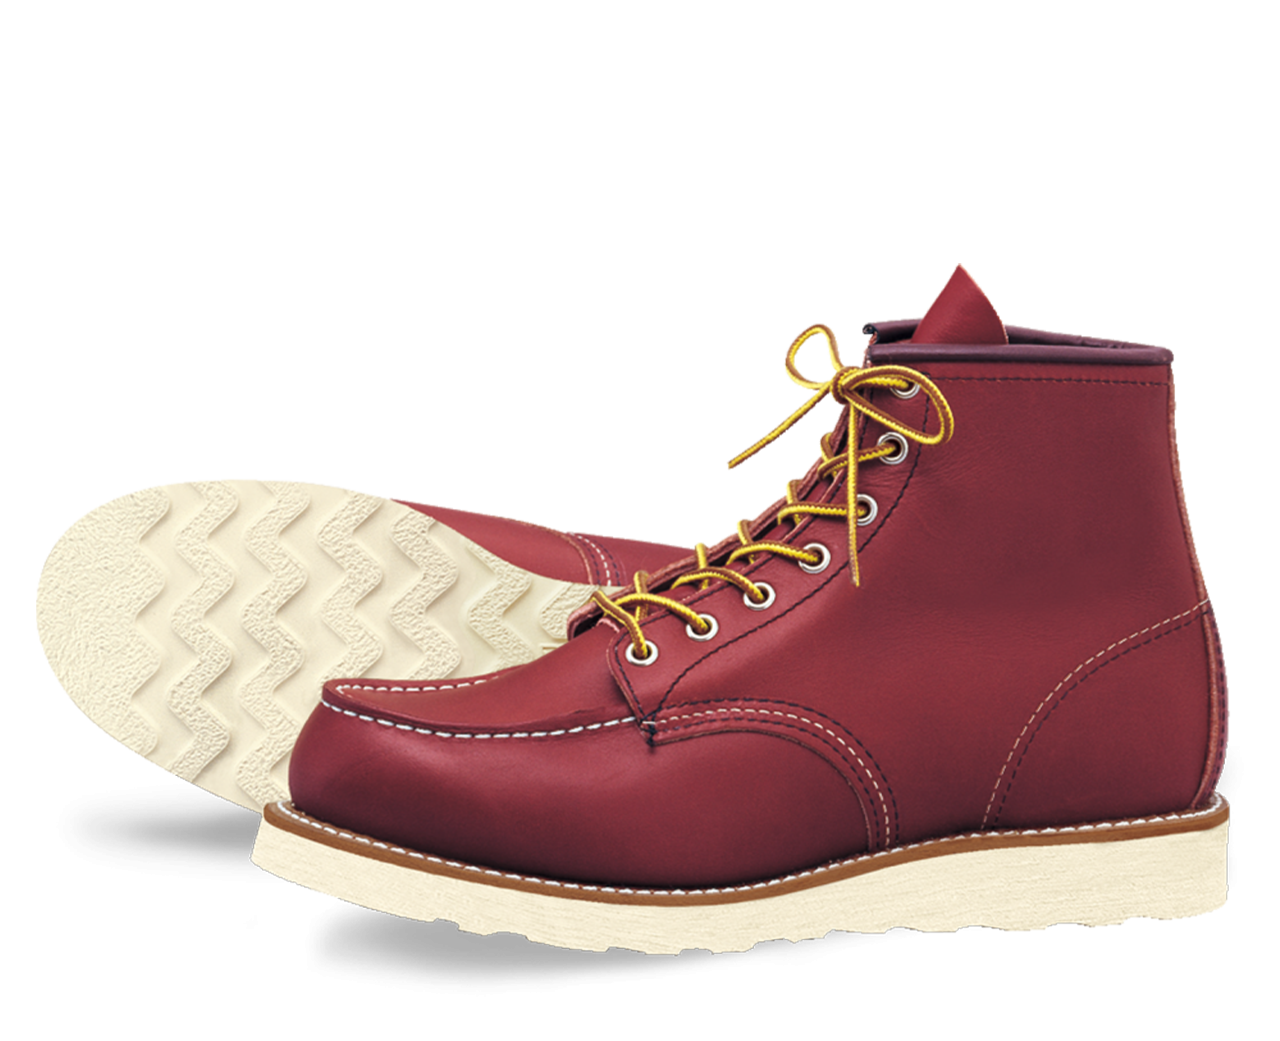 Red Wing 8875 Moc Toe Limited